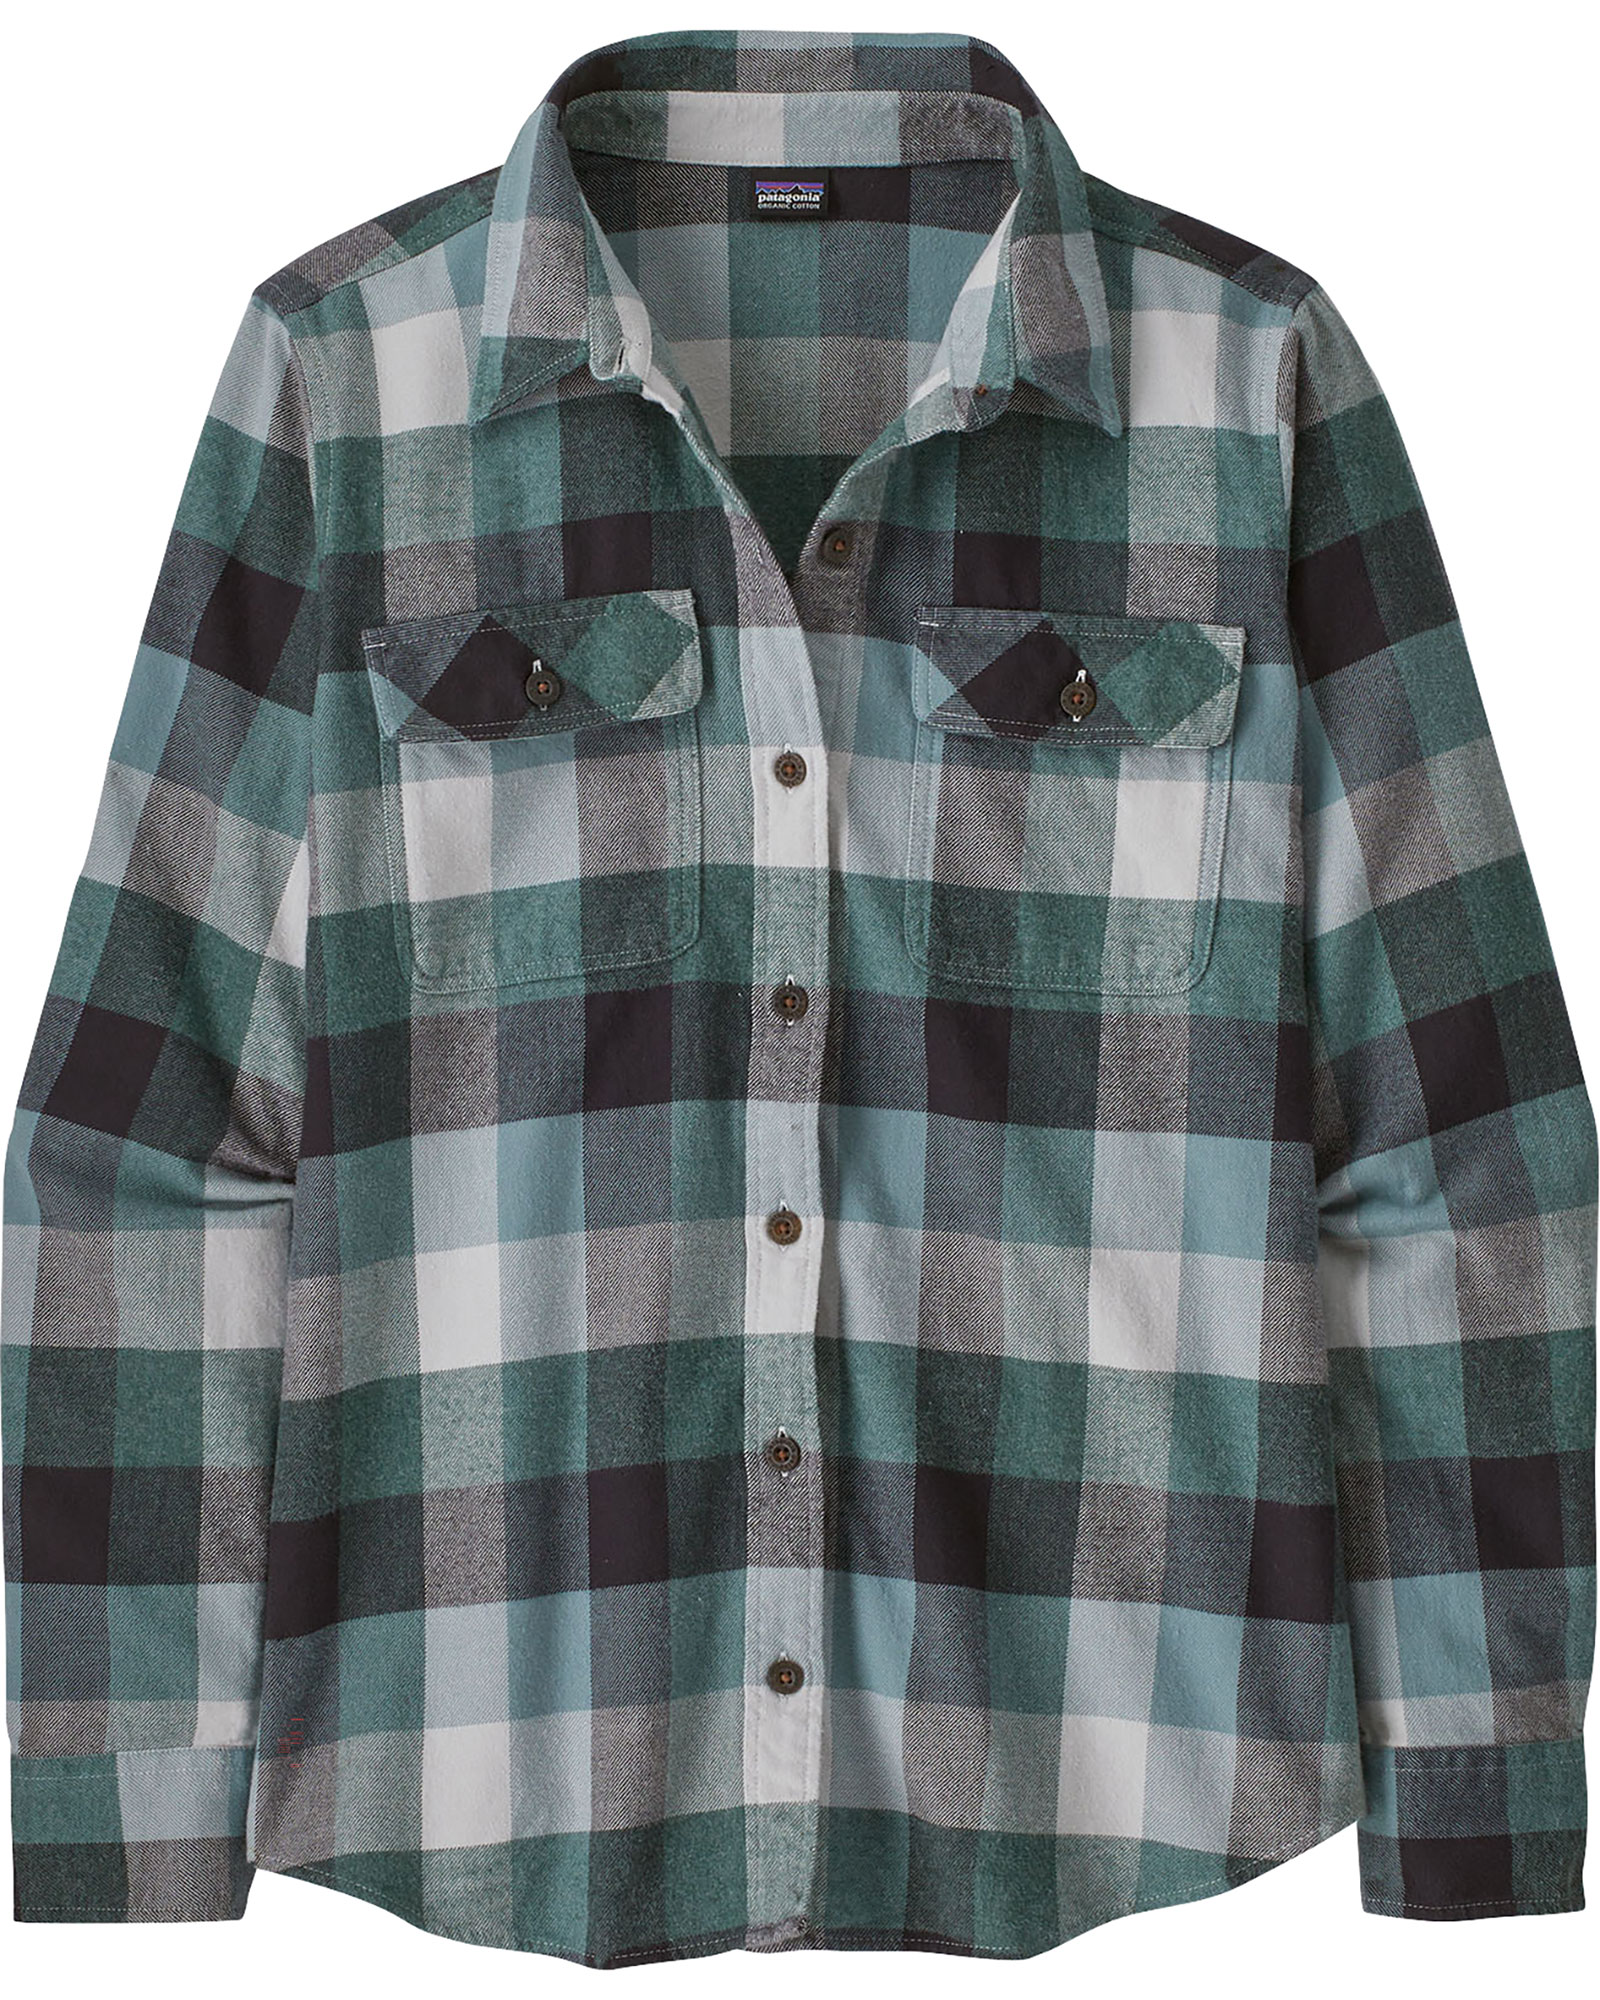 Patagonia Women’s Organic Cotton MW Fjord Flannel Long Sleeved Shirt - Guides: Nouveau Green L